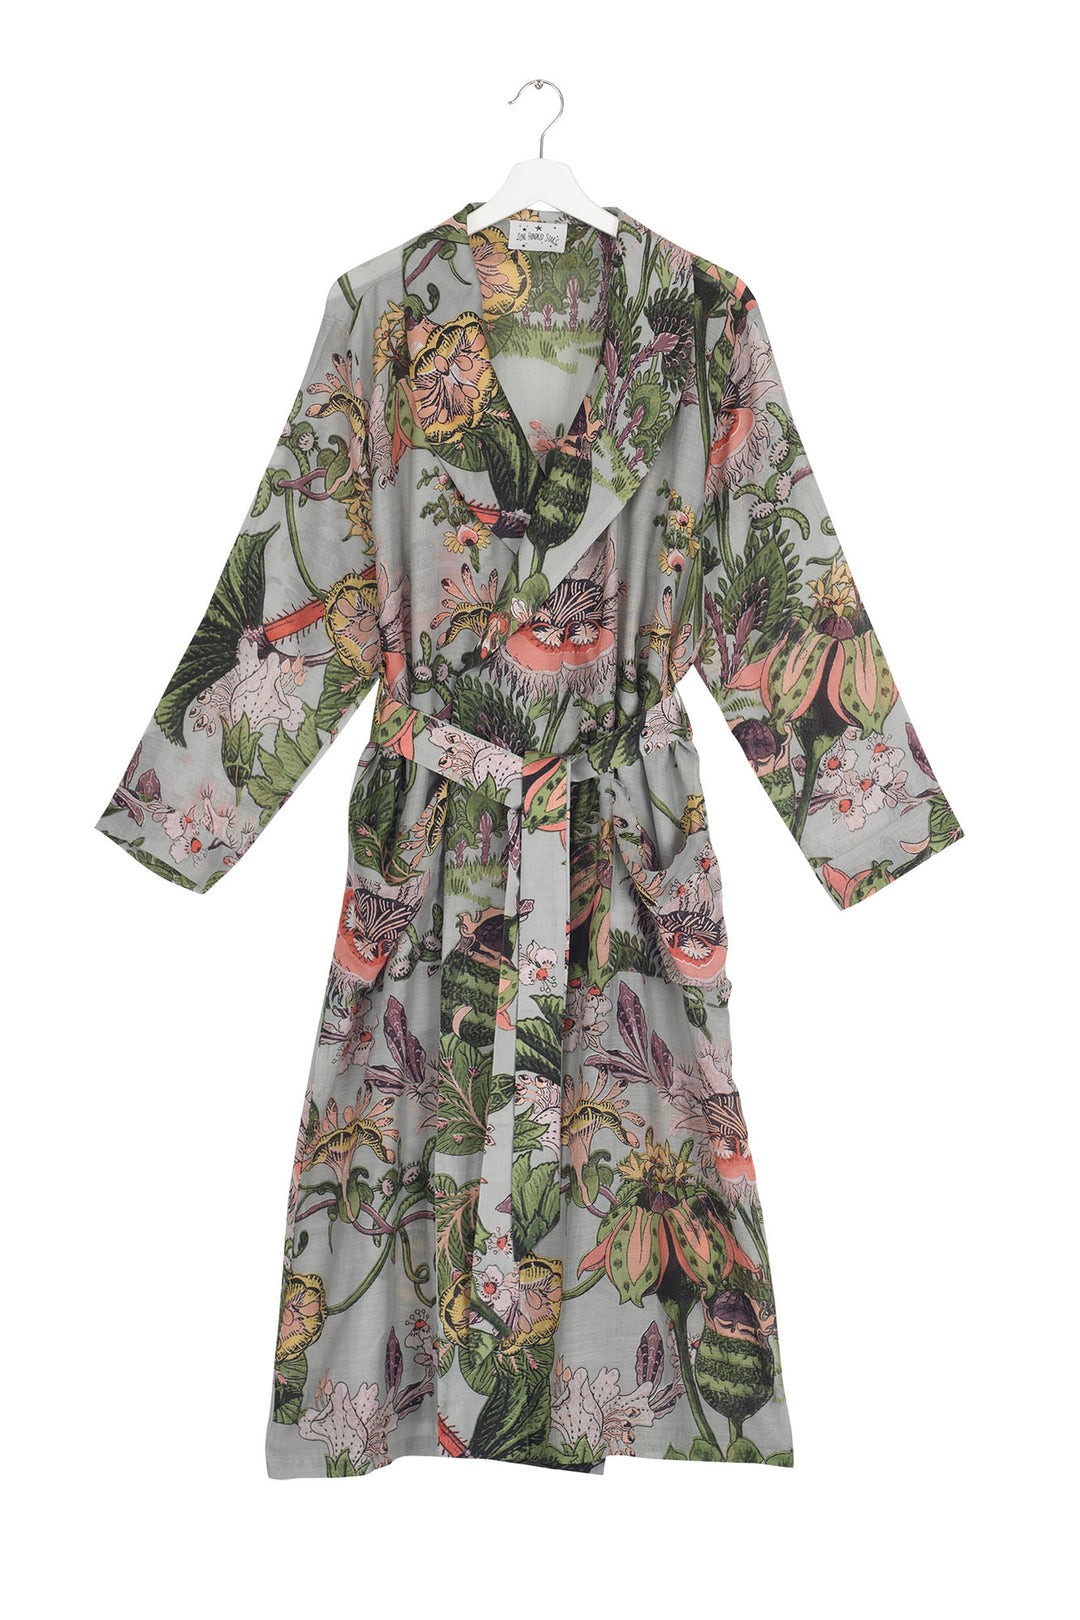 One Hundred Stars Eccentric Blooms Gown in Putty features prominent psychedelic florals and oversized seedpods making delicate use of neon greens and fluoro pinks teamed with a rich putty background